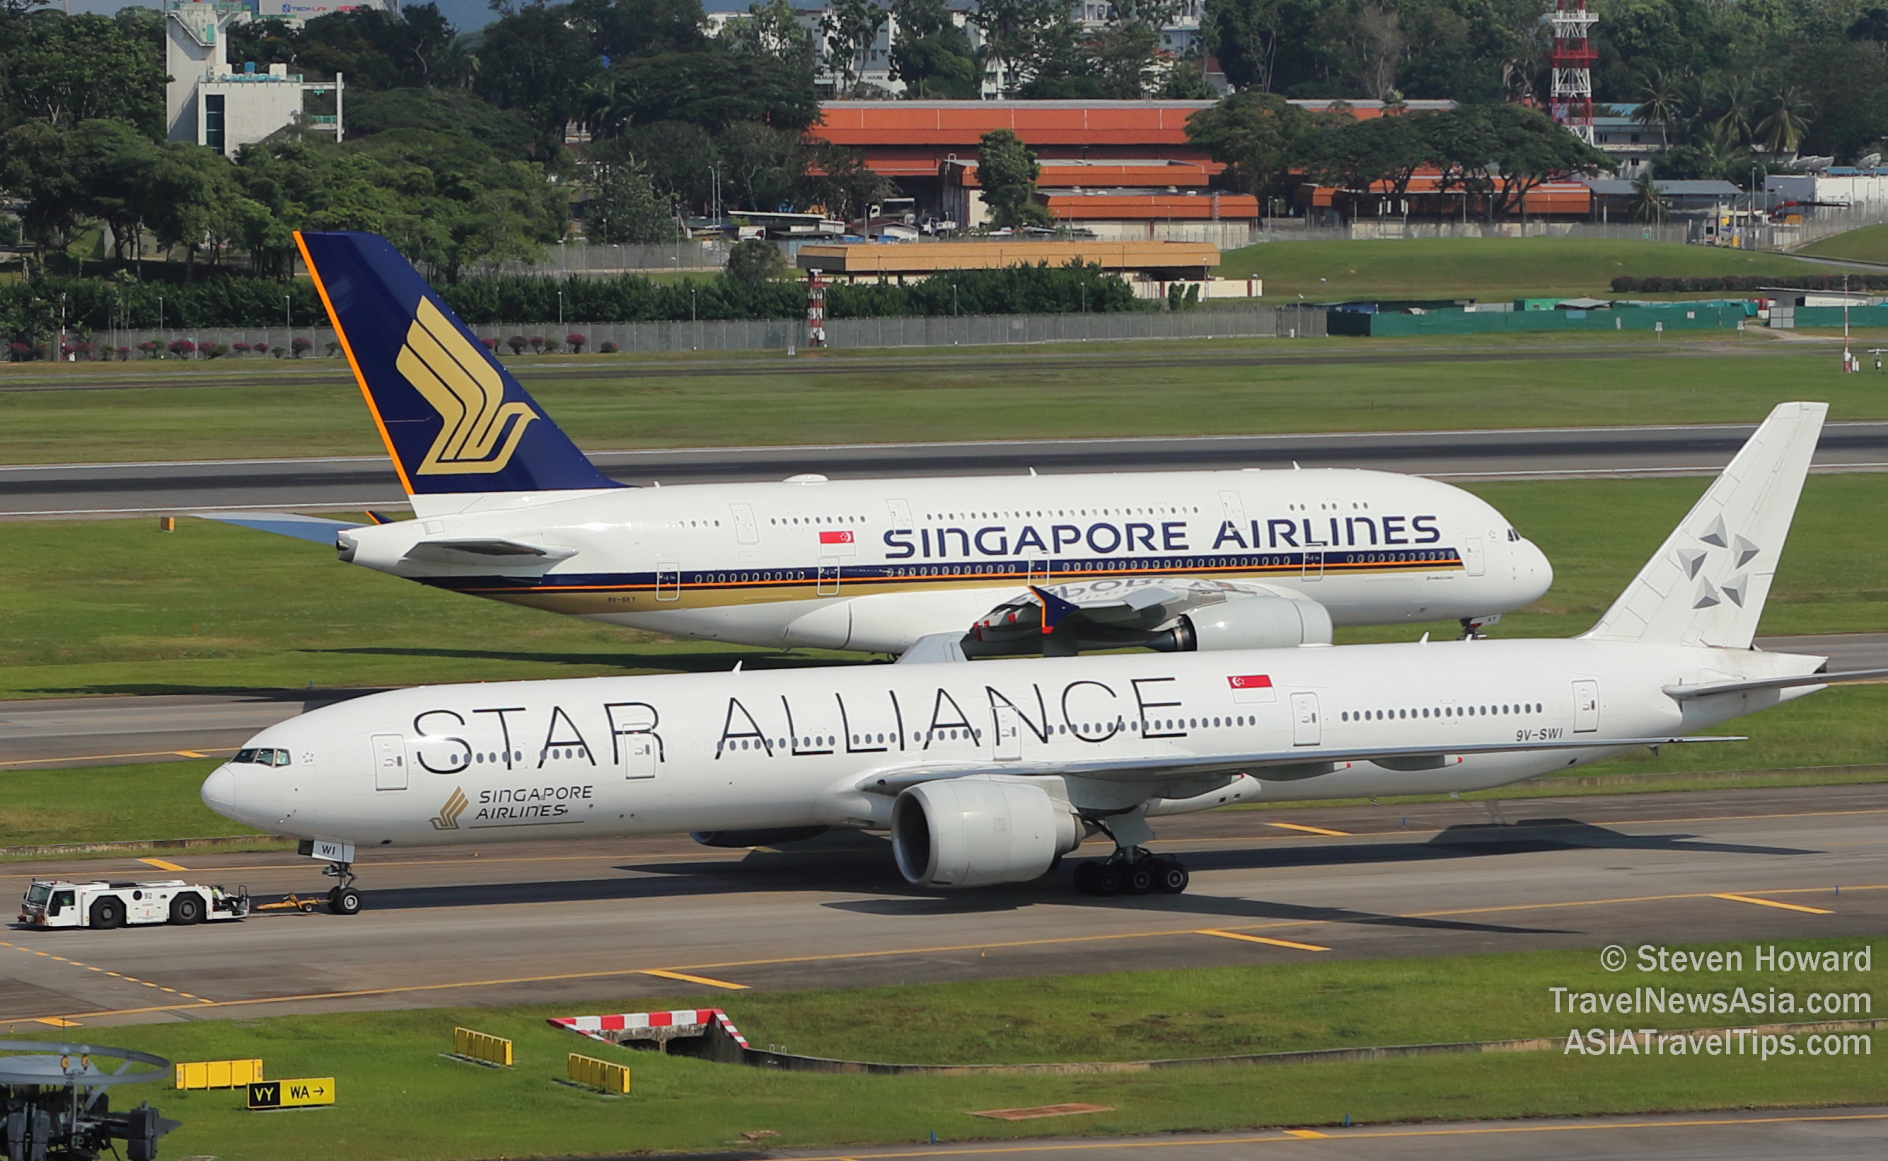 Singapore Airlines A380 and B777 at Changi Airport. Picture by Steven Howard of TravelNewsAsia.com Click to enlarge.